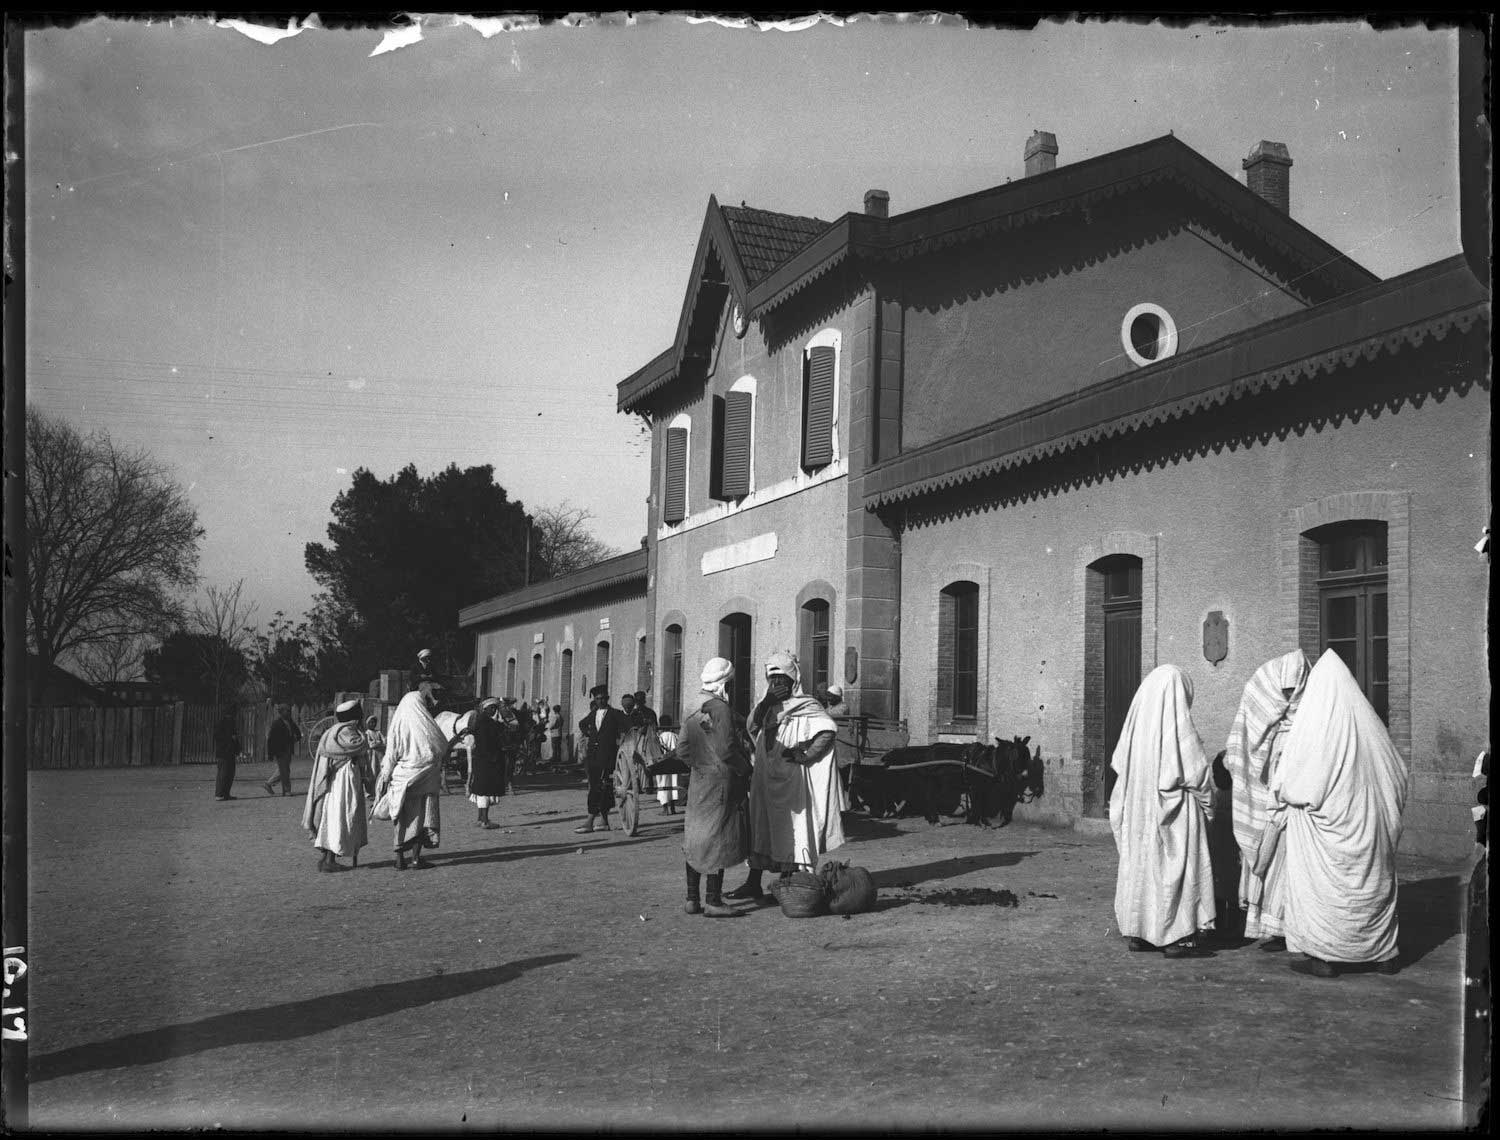 People, mostly in local clothing in front of a building, possibly a station